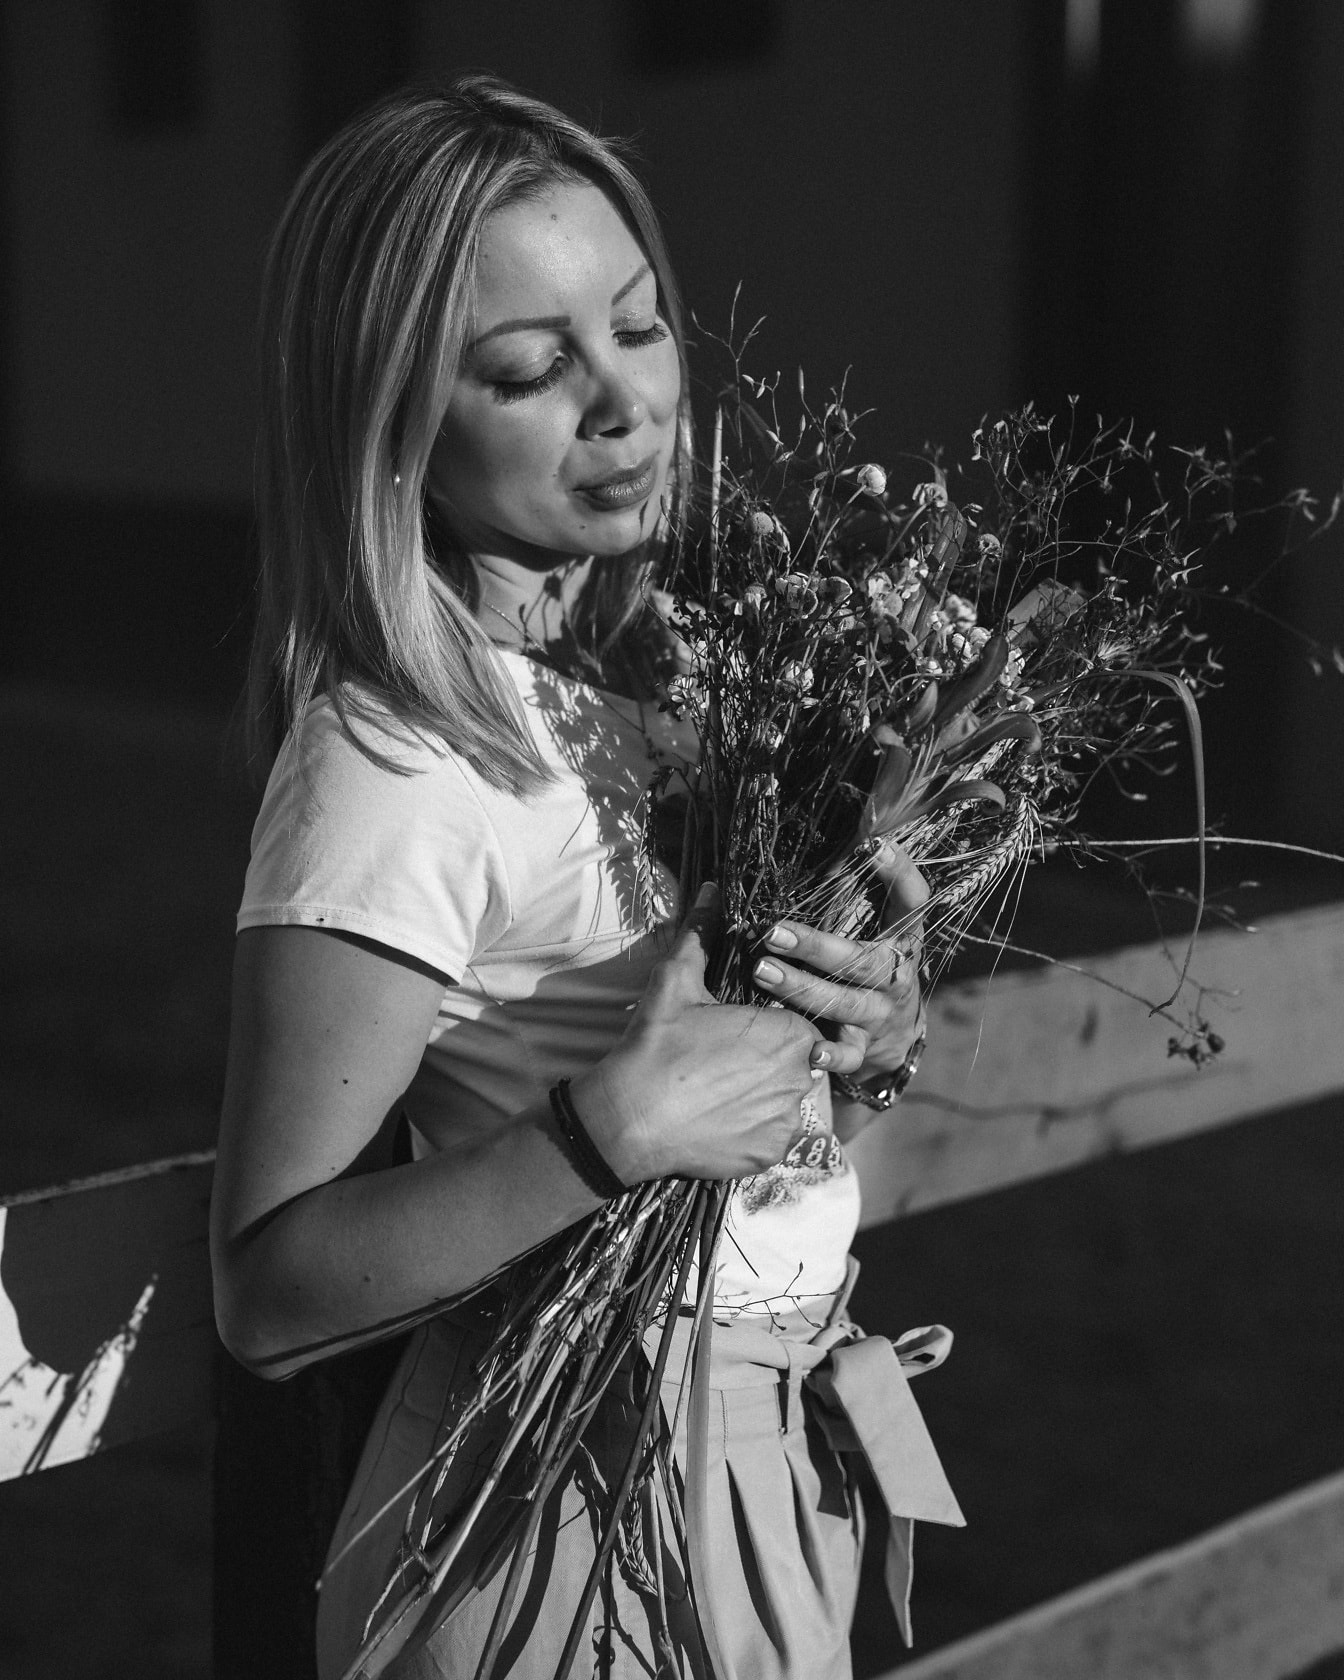 Monochrome photograph of young women holding bouquet of dry flowers